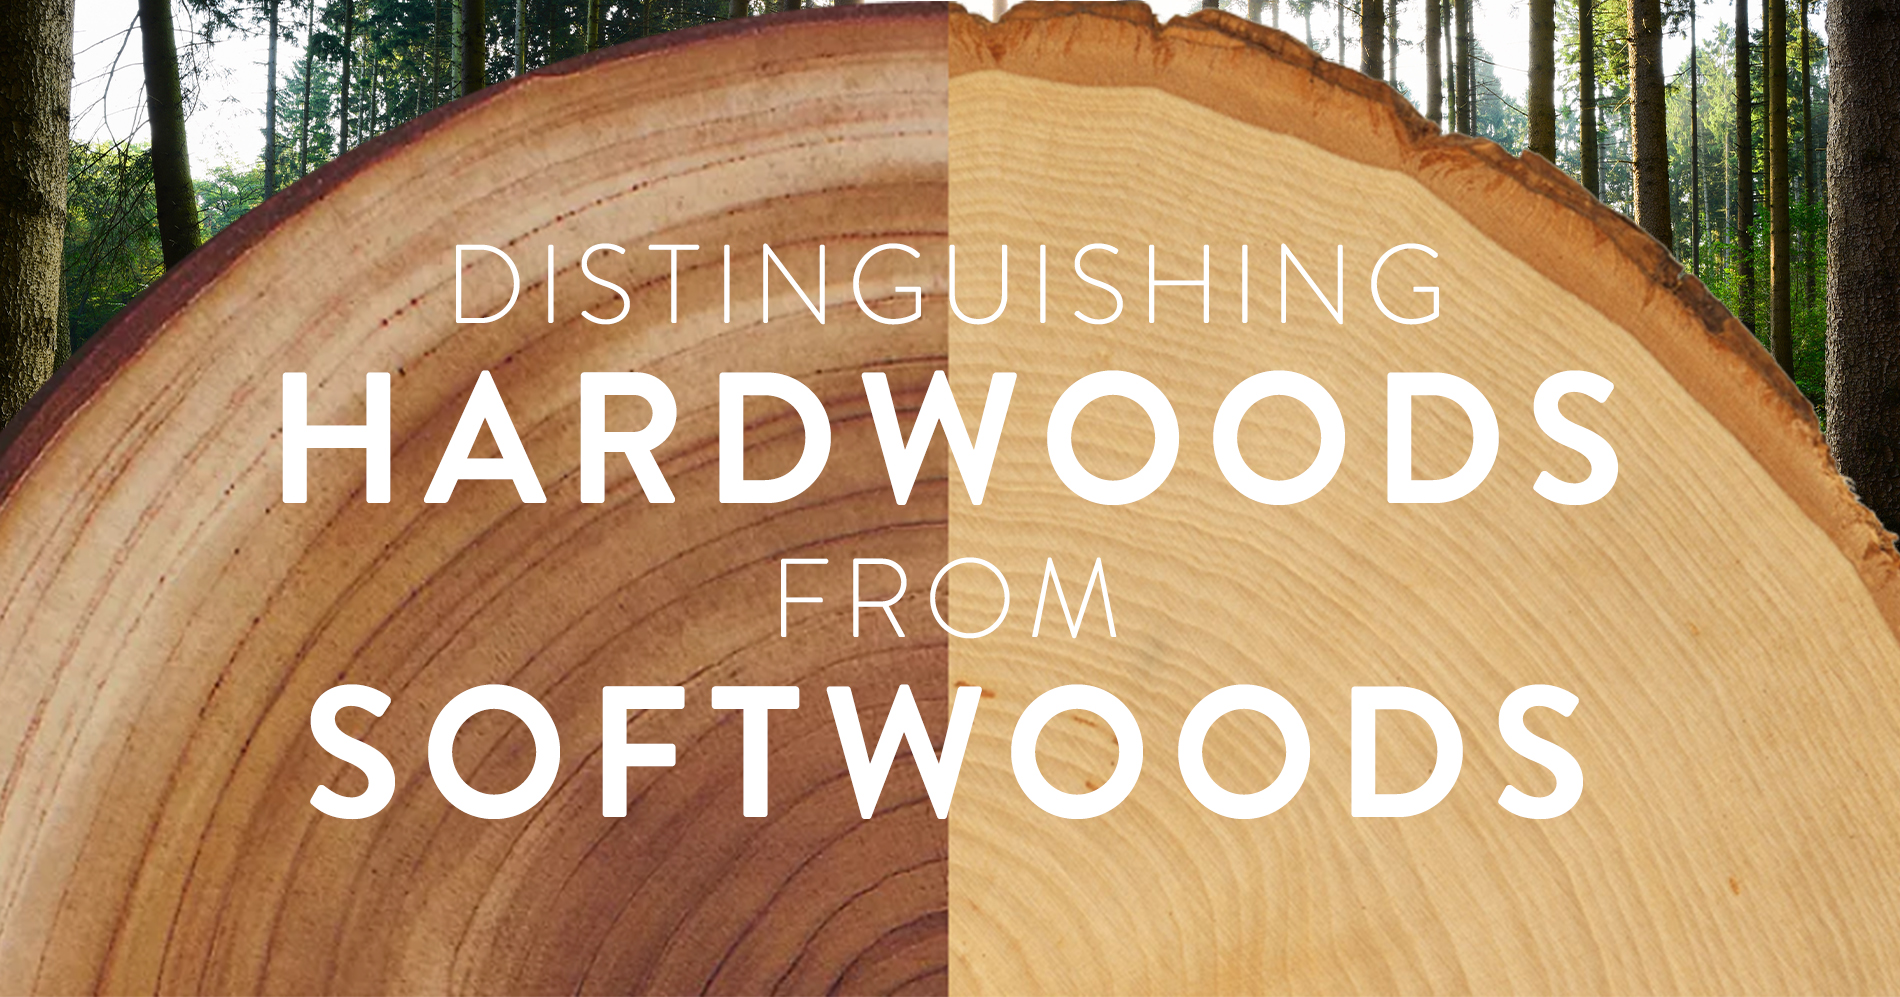 Are Hardwood Trees Fast Growing? A Comparison of Hardwood And Softwood Trees 